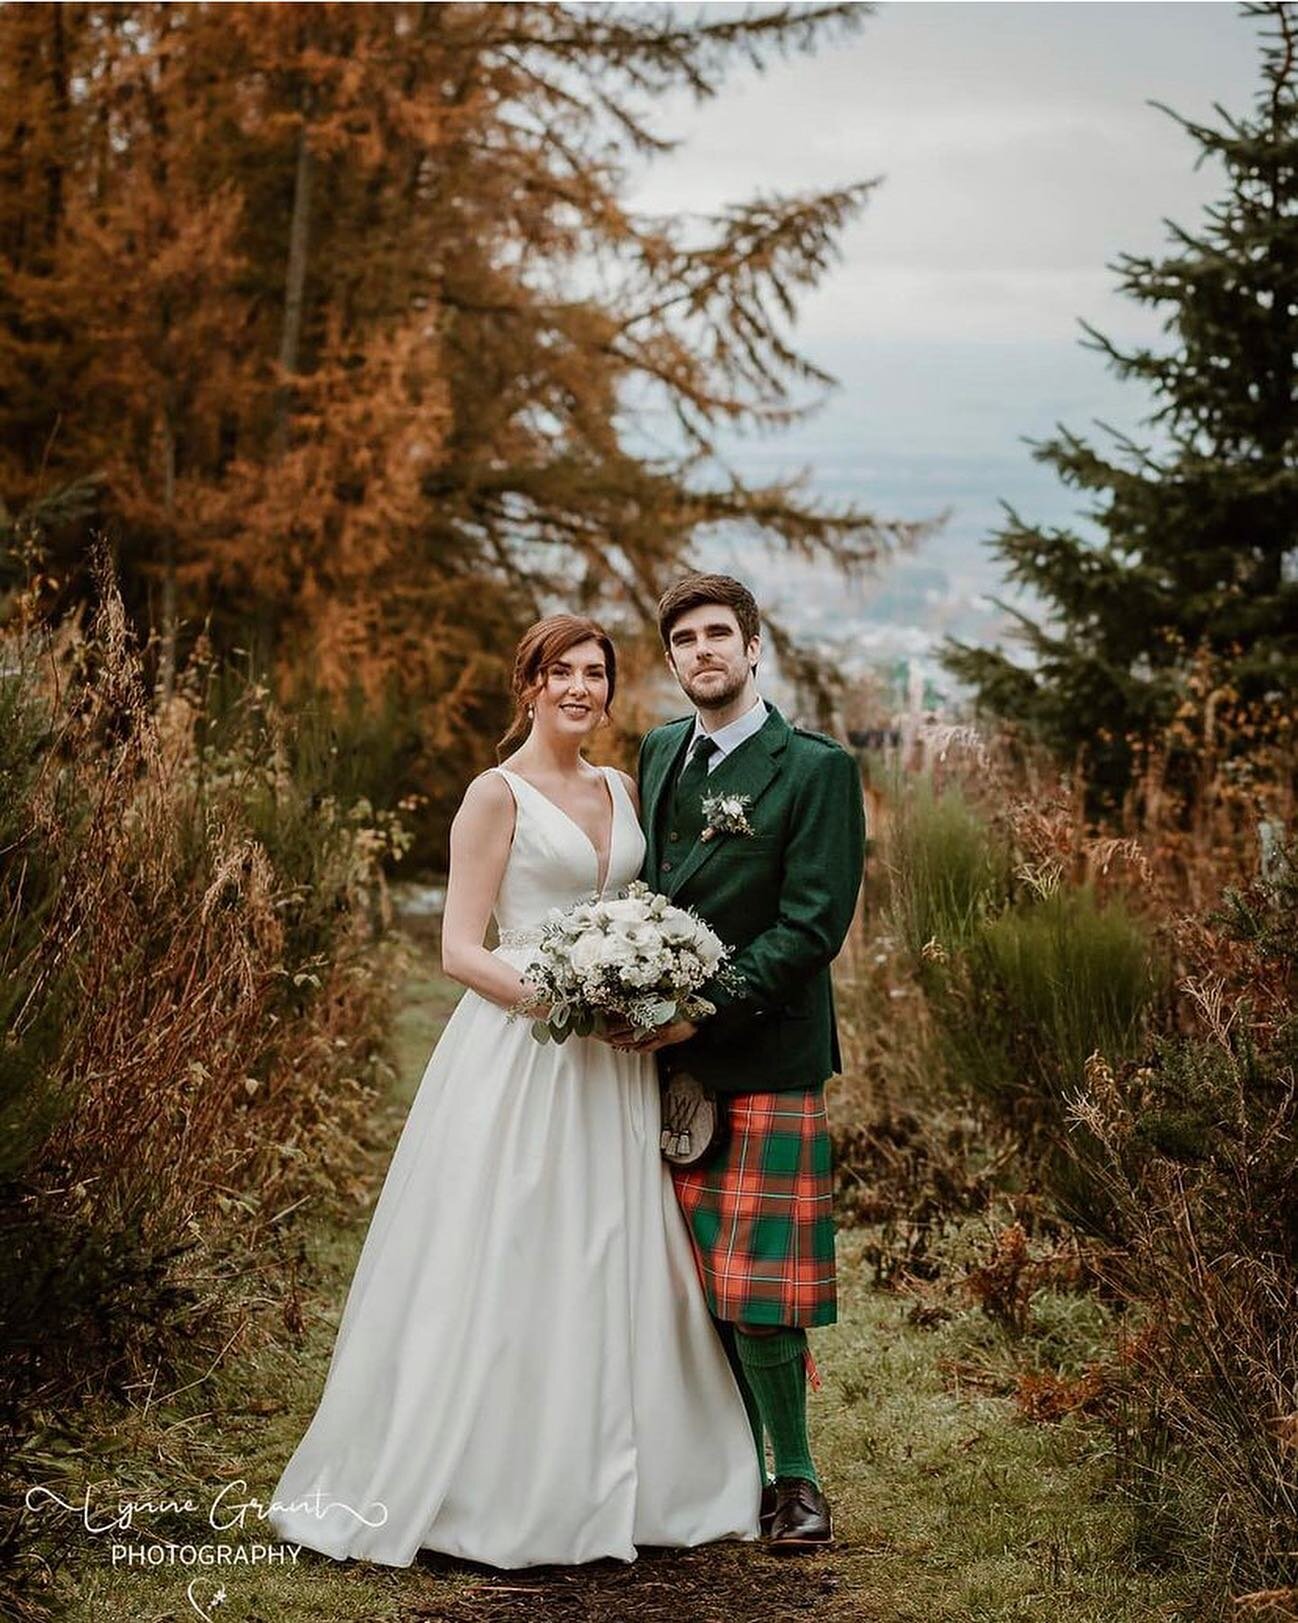 I&rsquo;m so lucky to meet such amazing couples. Louise and Jamie were a dream to work with to bring their vision to life. So exciting to see the first images from their wedding on Saturday at the stunning @alexanderhousescotland 

📷 @lynnegrant_pho